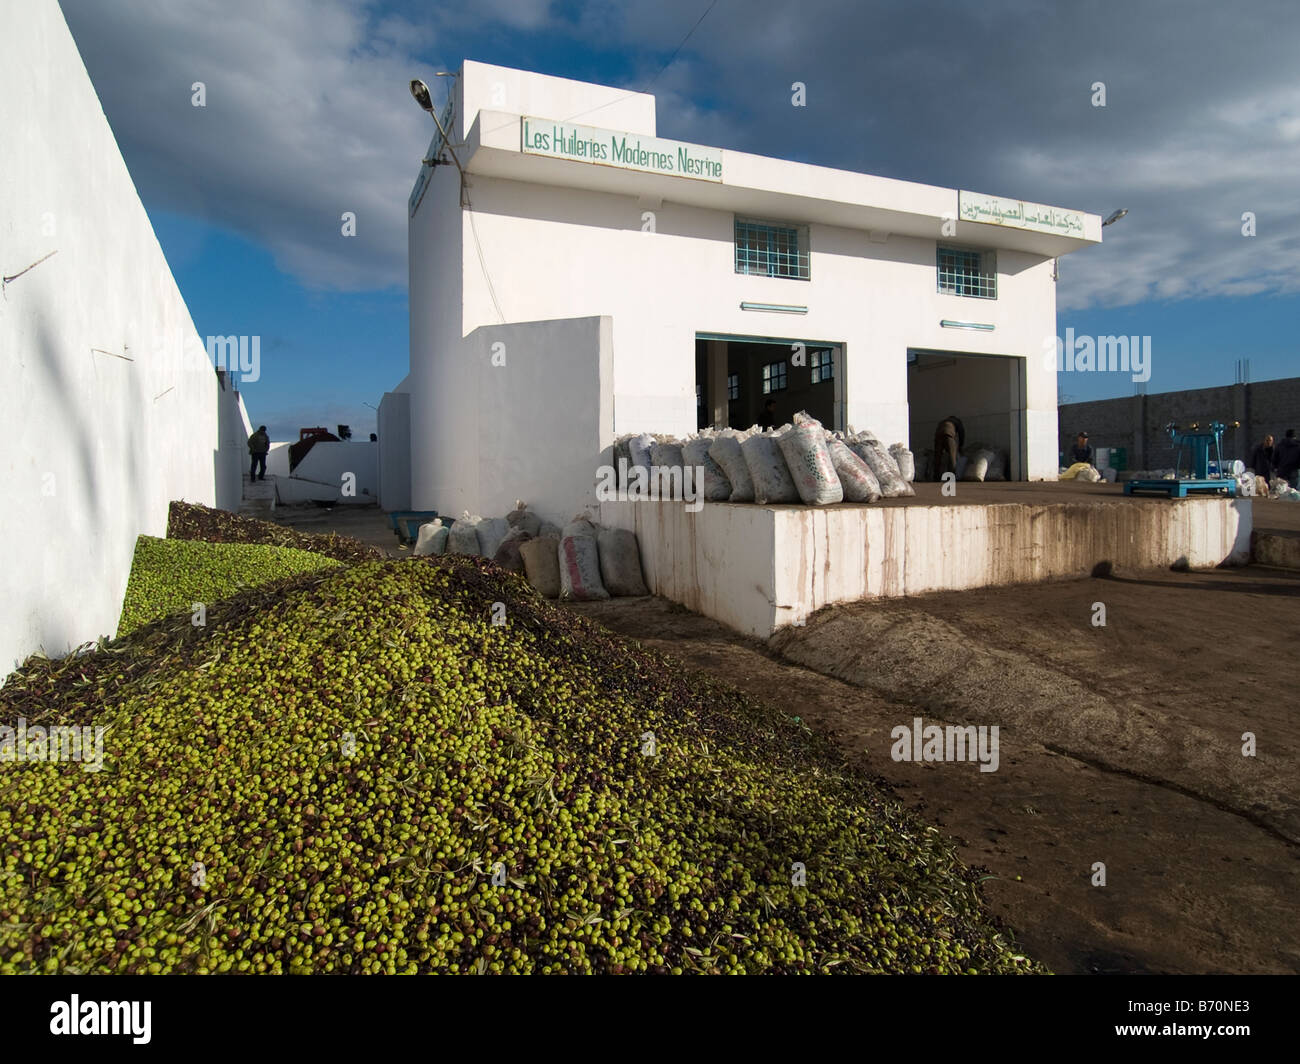 Exterior of a modern olive pressing factory near Hammamet Tunisia. Piles of olives foreground Stock Photo